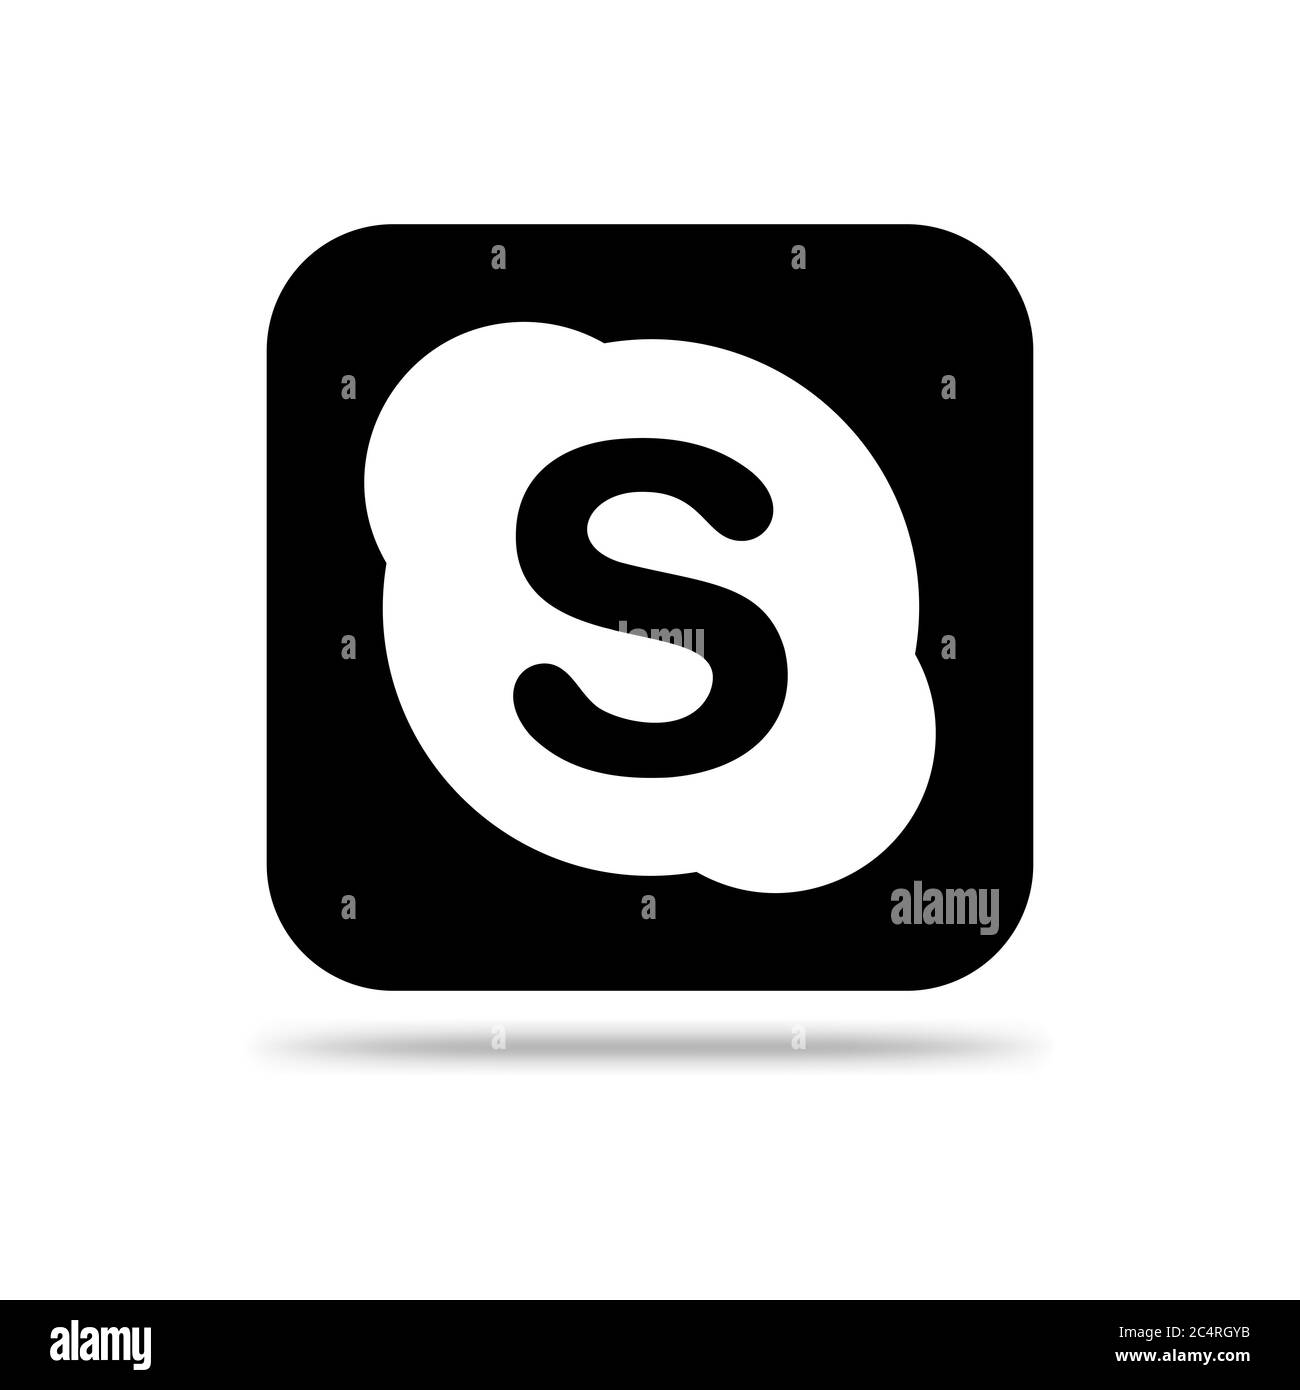 VORONEZH, RUSSIA - JANUARY 31, 2020: Skype logo black square icon with shadow Stock Vector